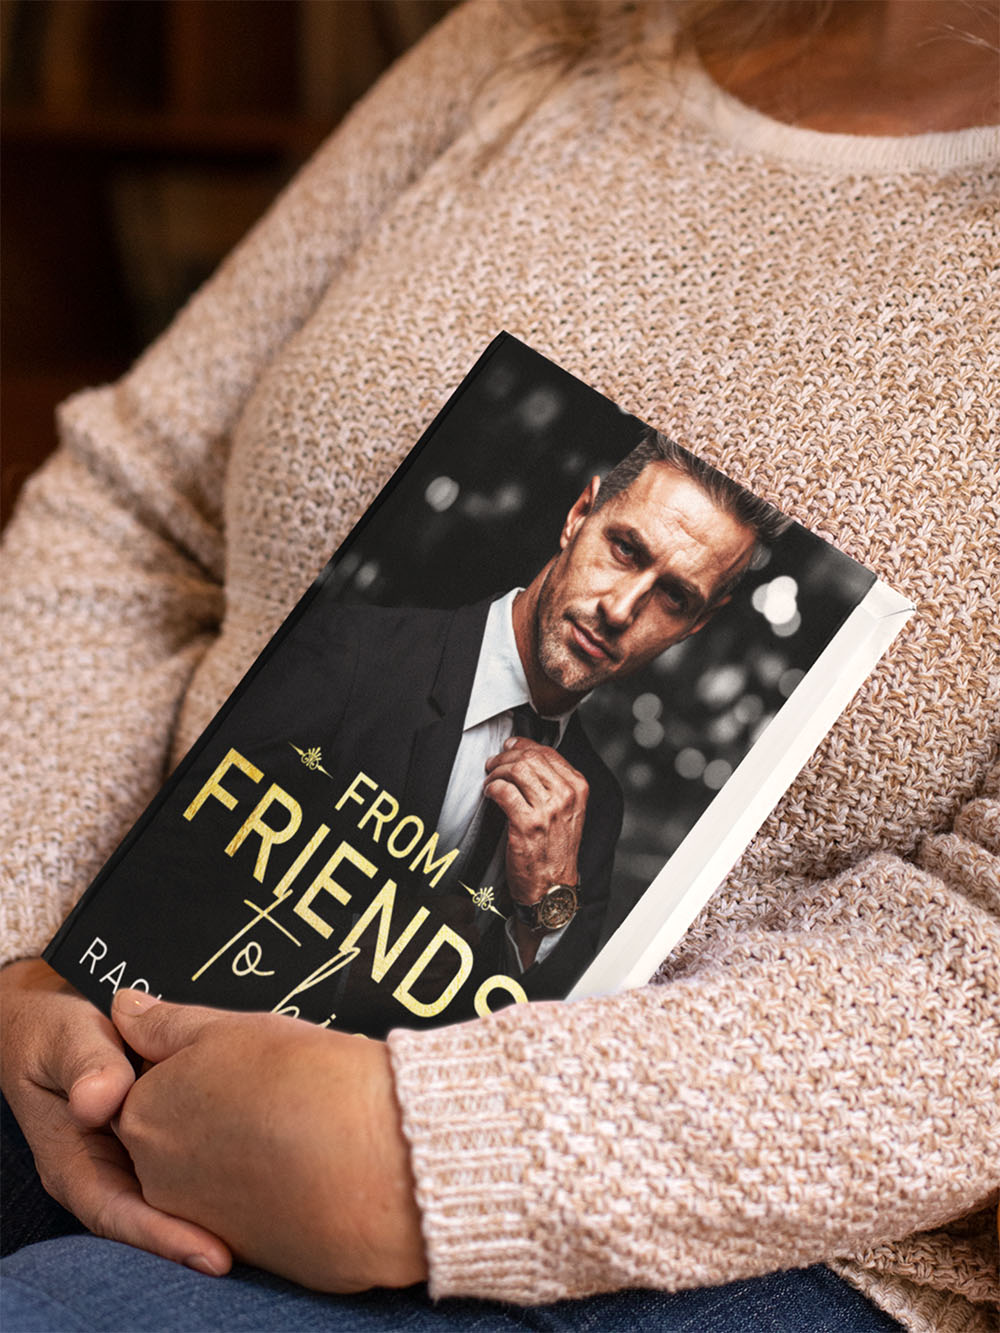 From Friends to His - Prequel to The Tyrant's Secret Safe House (Paperback)